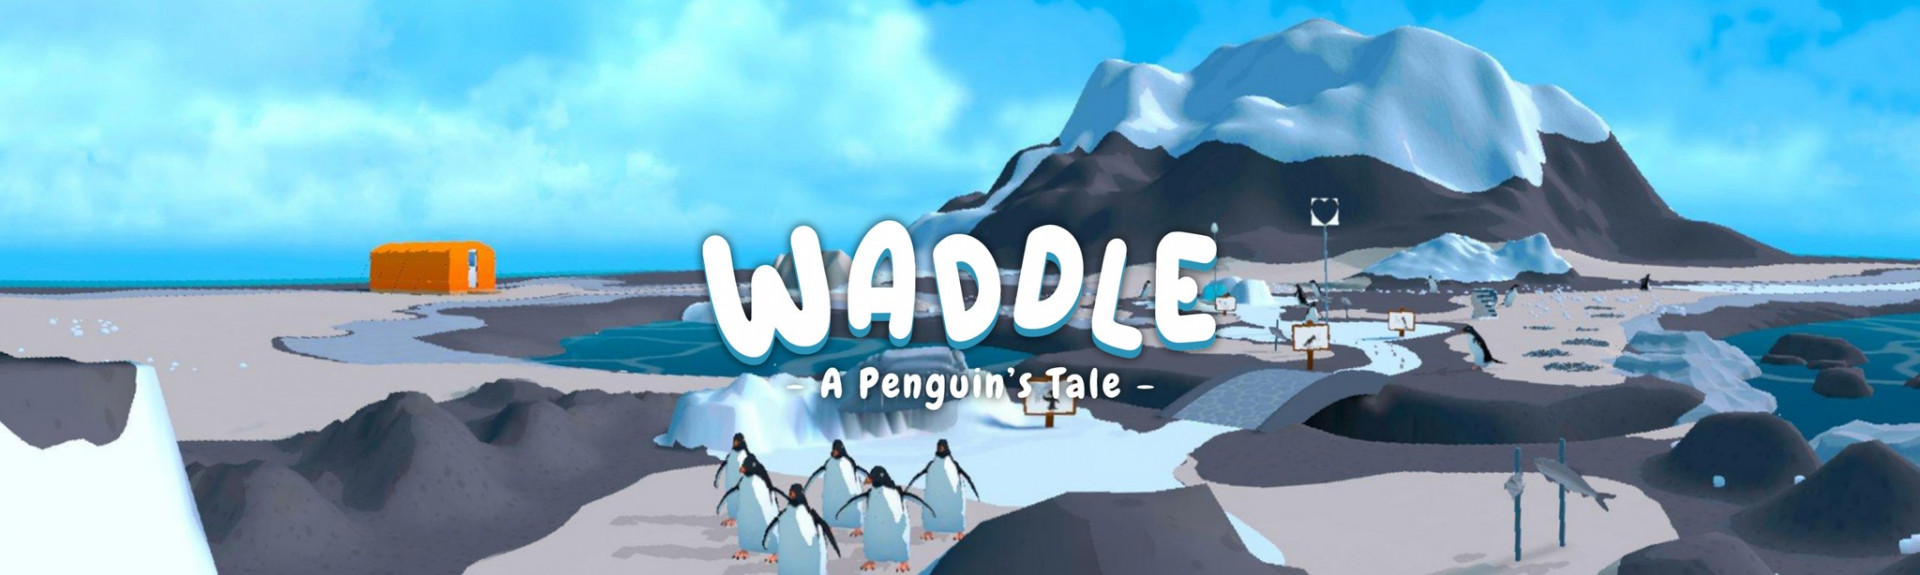 Waddle: A Penguin's Tale